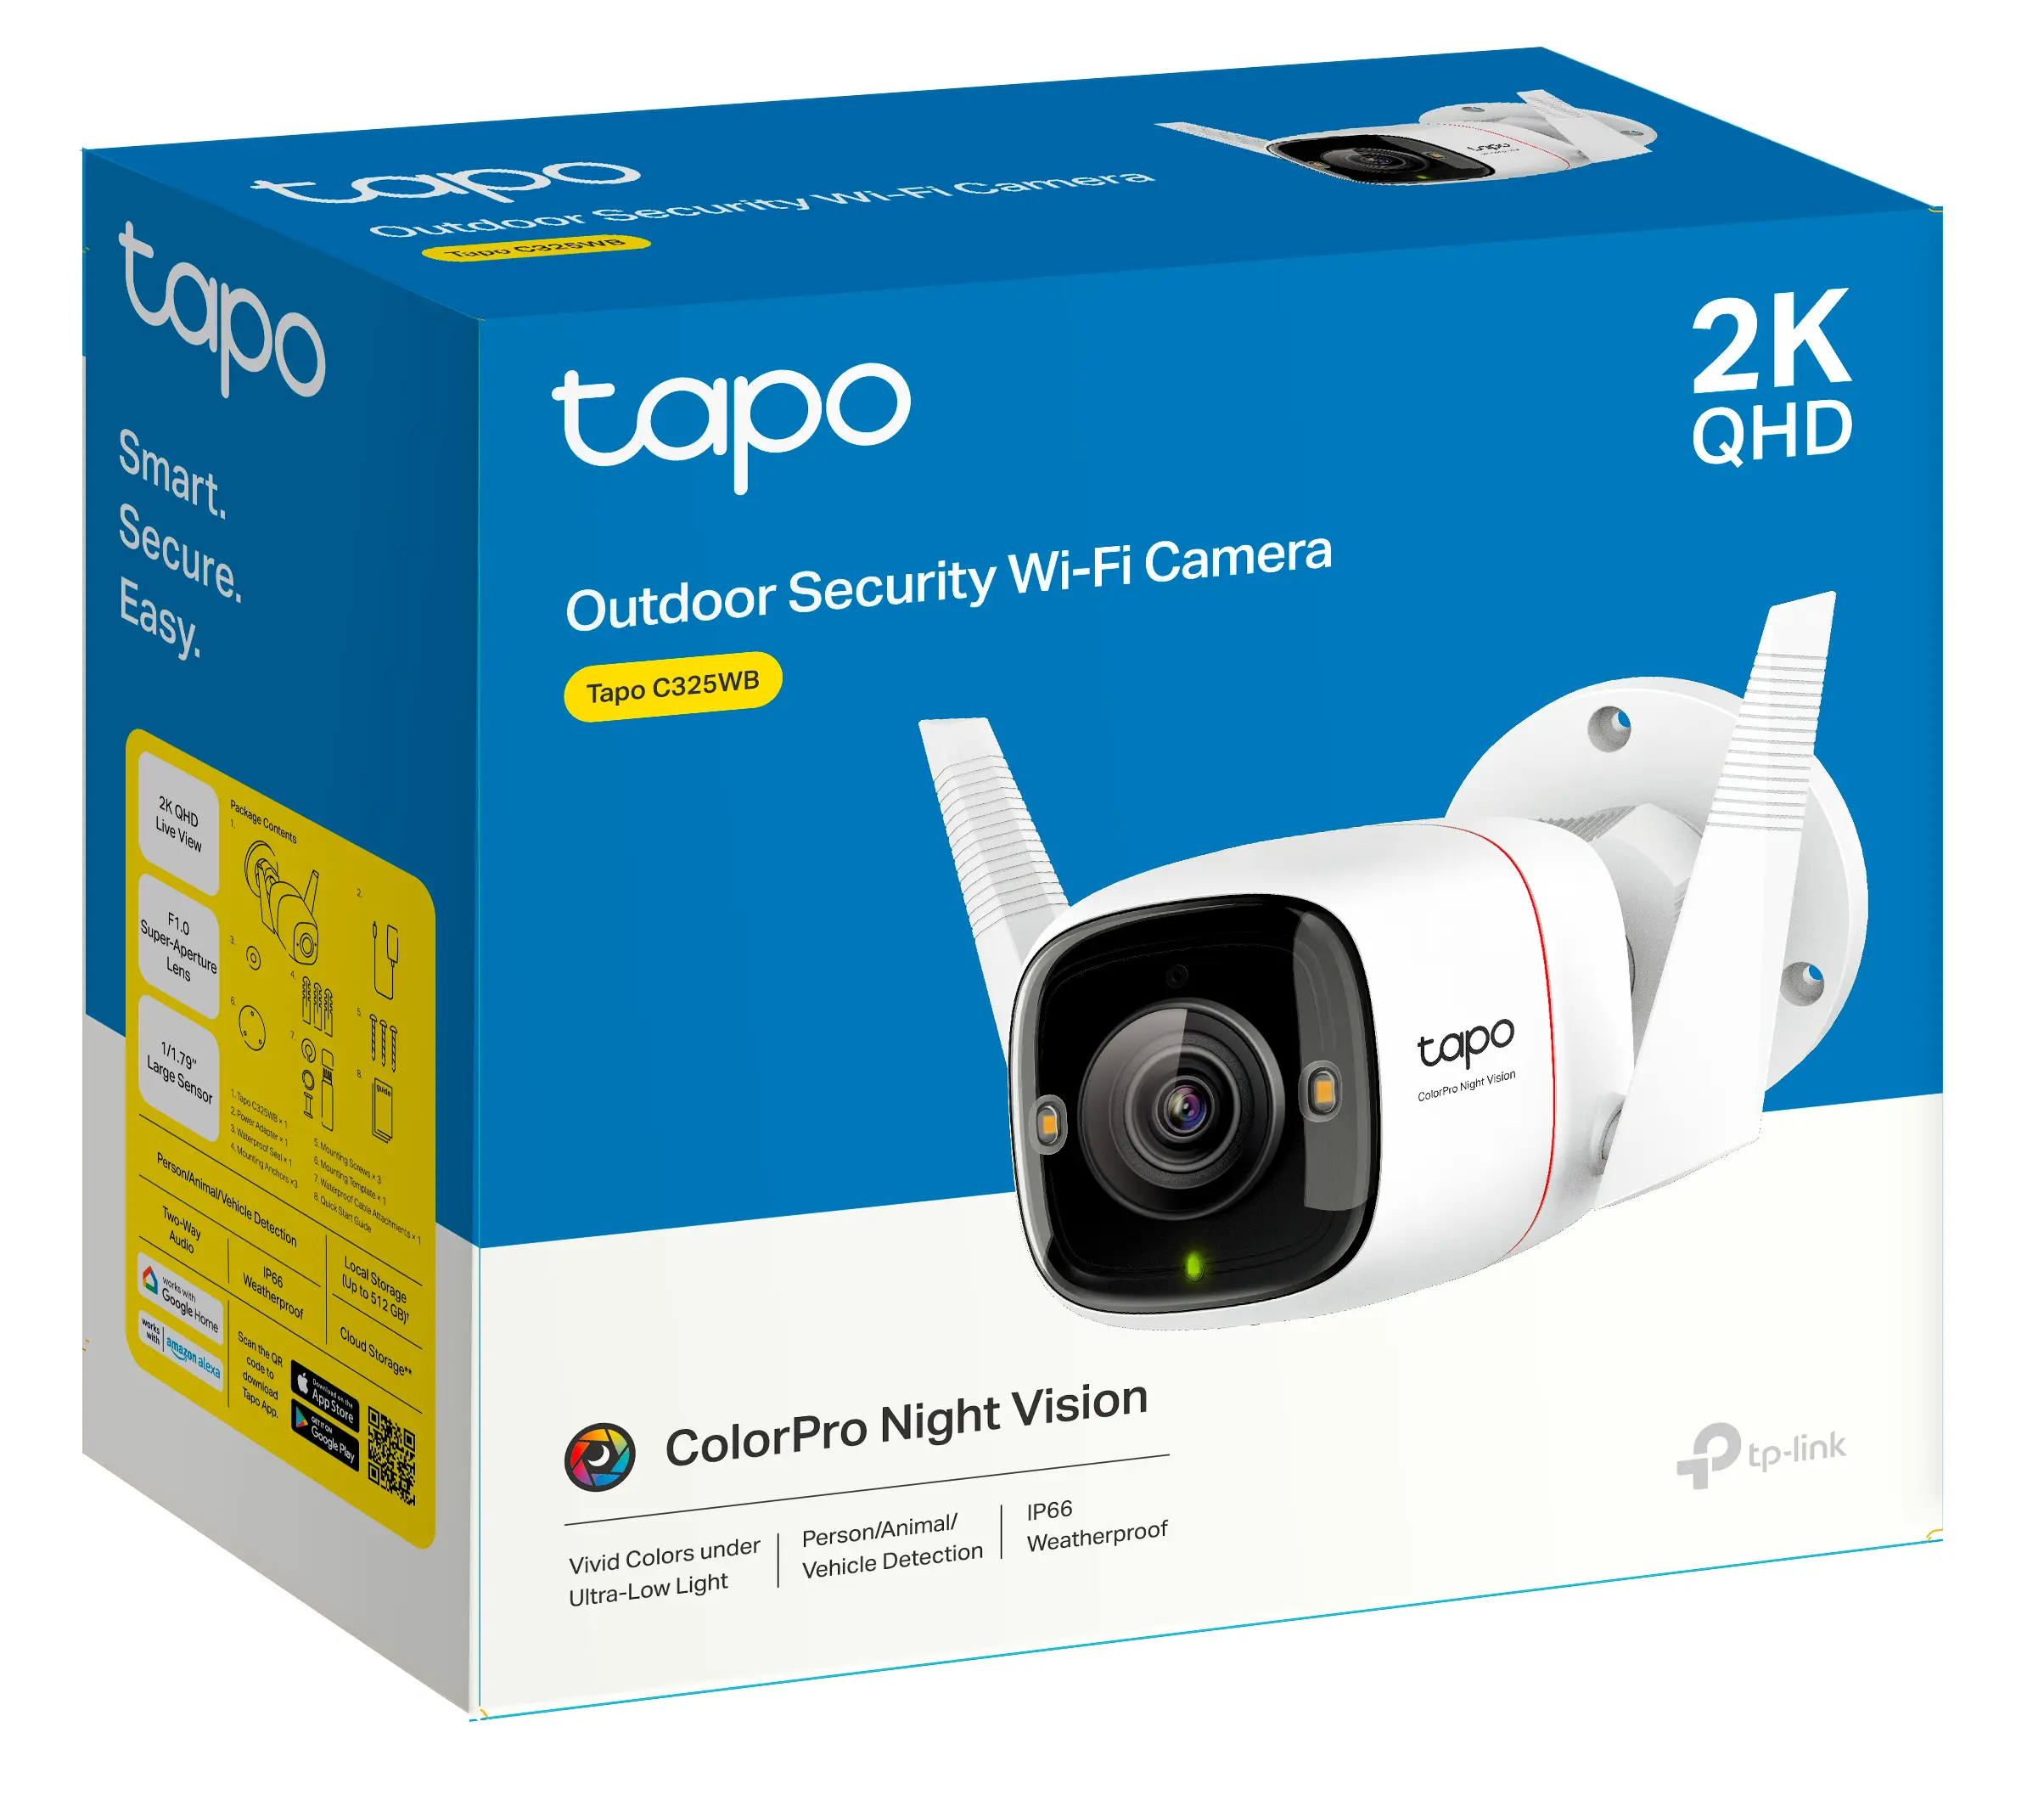 3x TP-Link Tapo Smart Cameras Review - for Outdoor Security Use